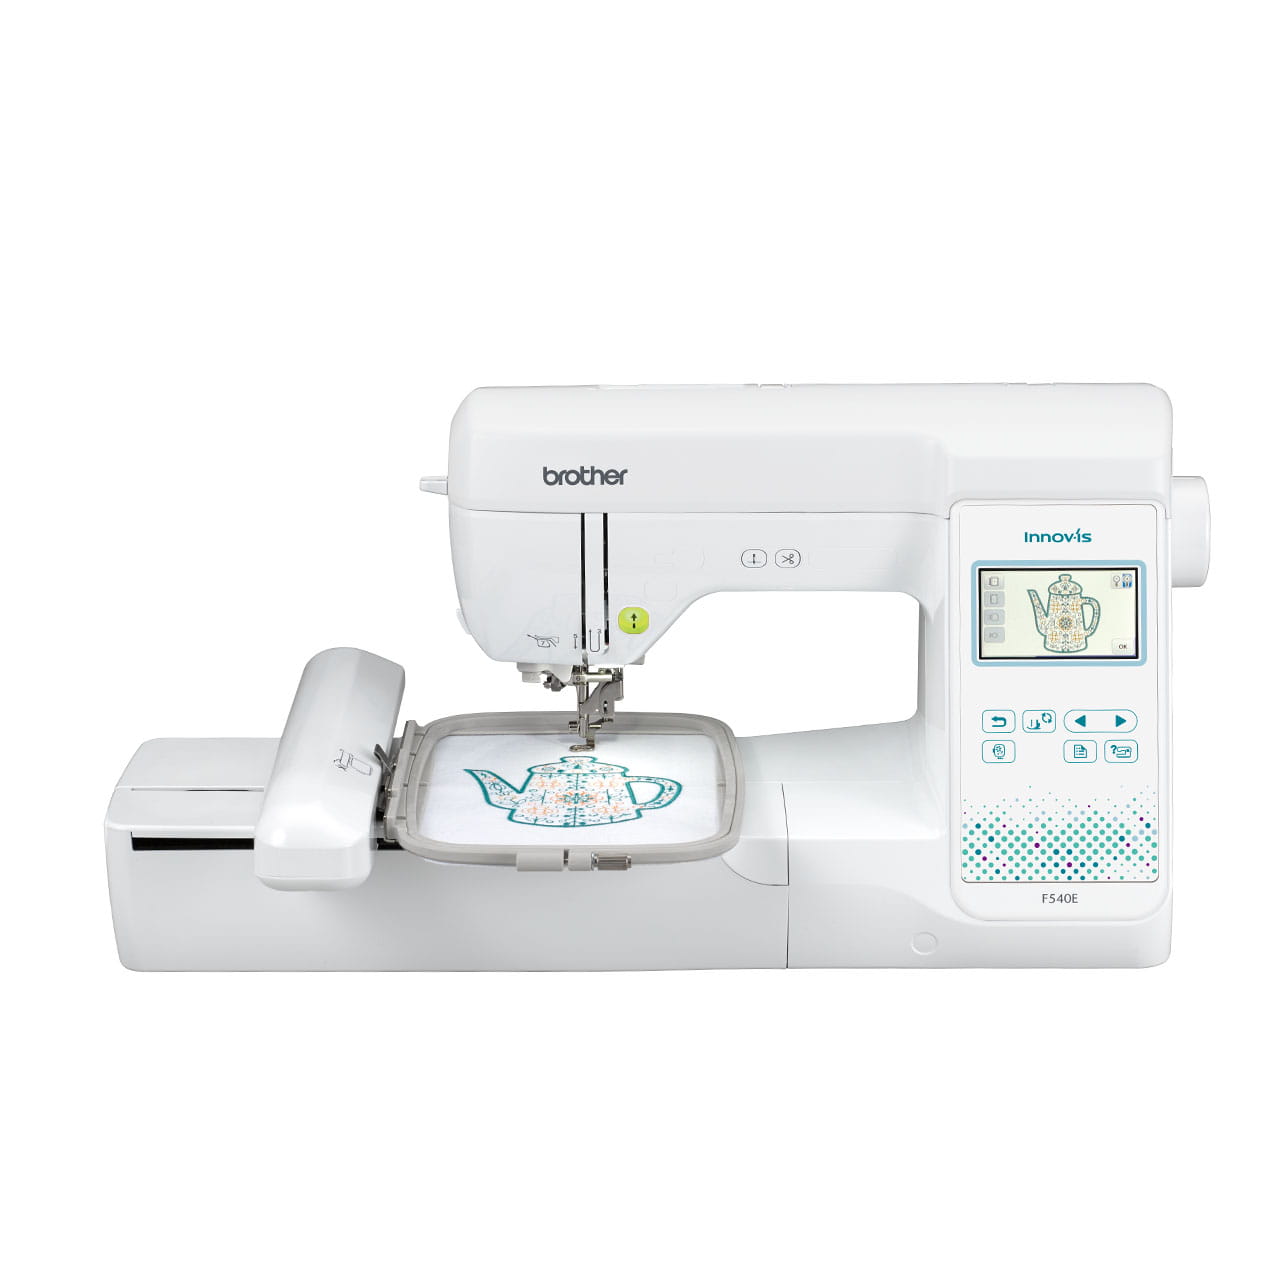 Brother Innov-is F540E Embroidery Machine Front View